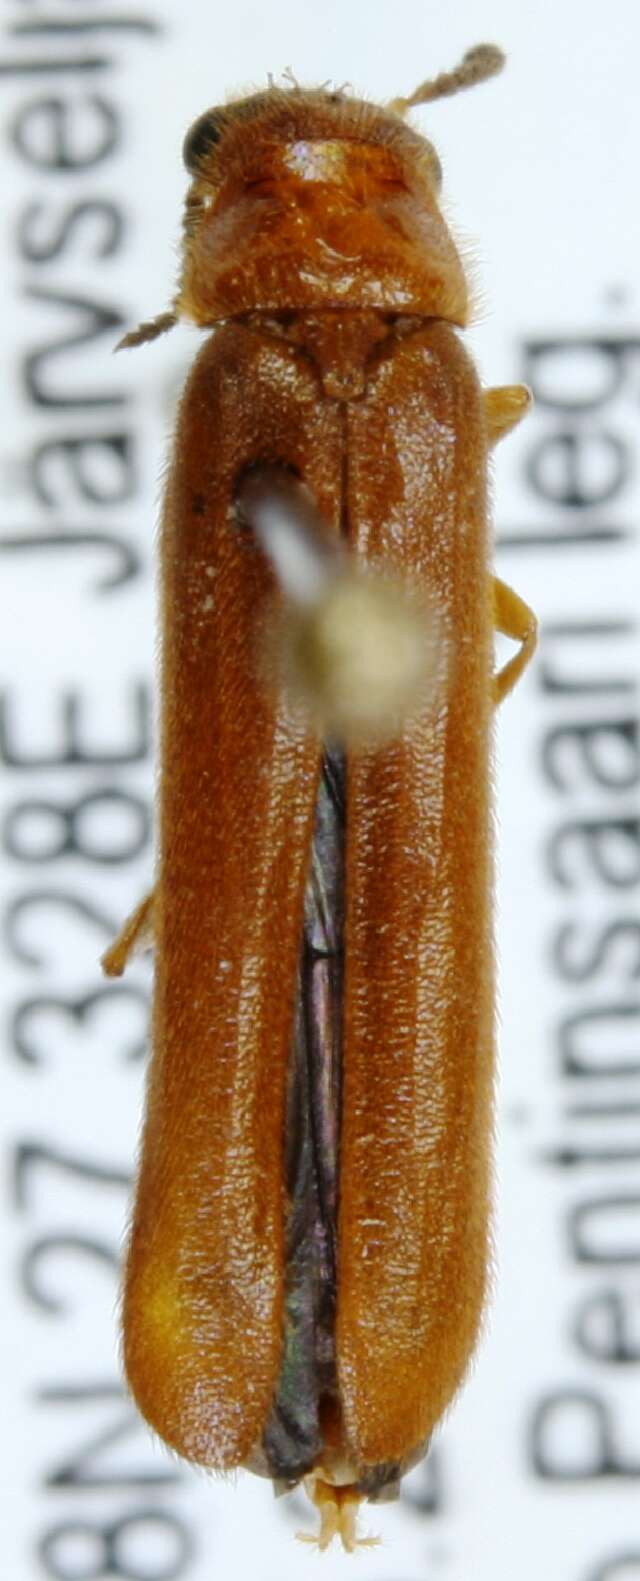 Image of Lymexyloidea